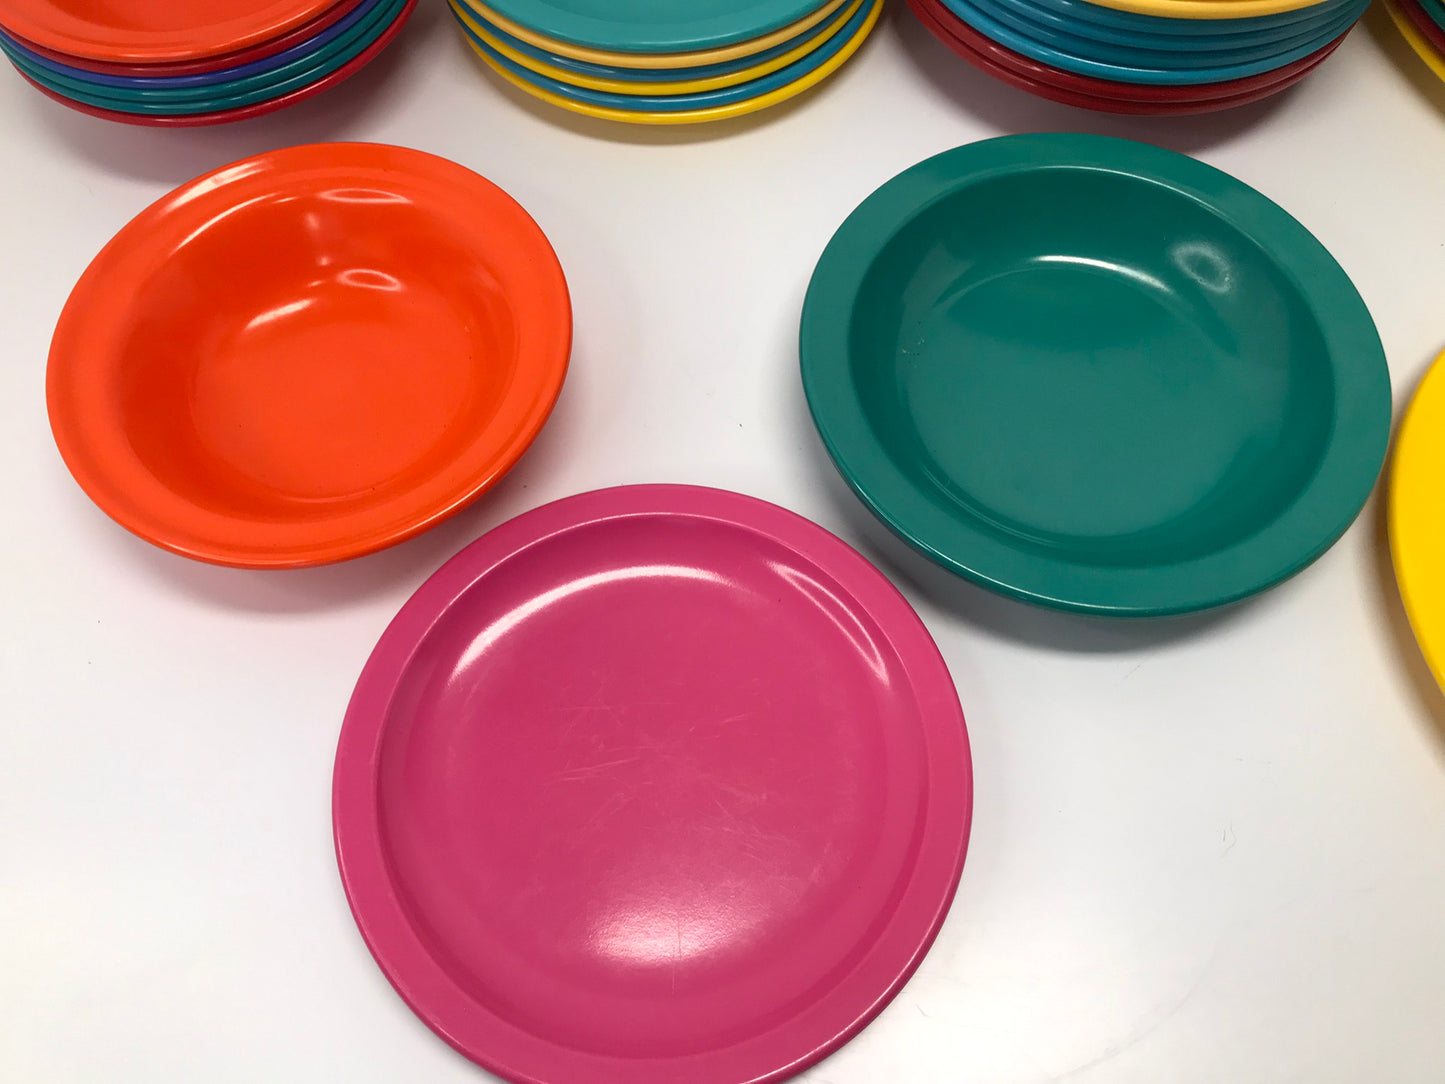 45 Pc 1970's  RARE Large Collection Texas Ware Melmac Camping Fishing Cabin Party Dishes 11 Small Bowls Are Vintage Mistral Made In Canada